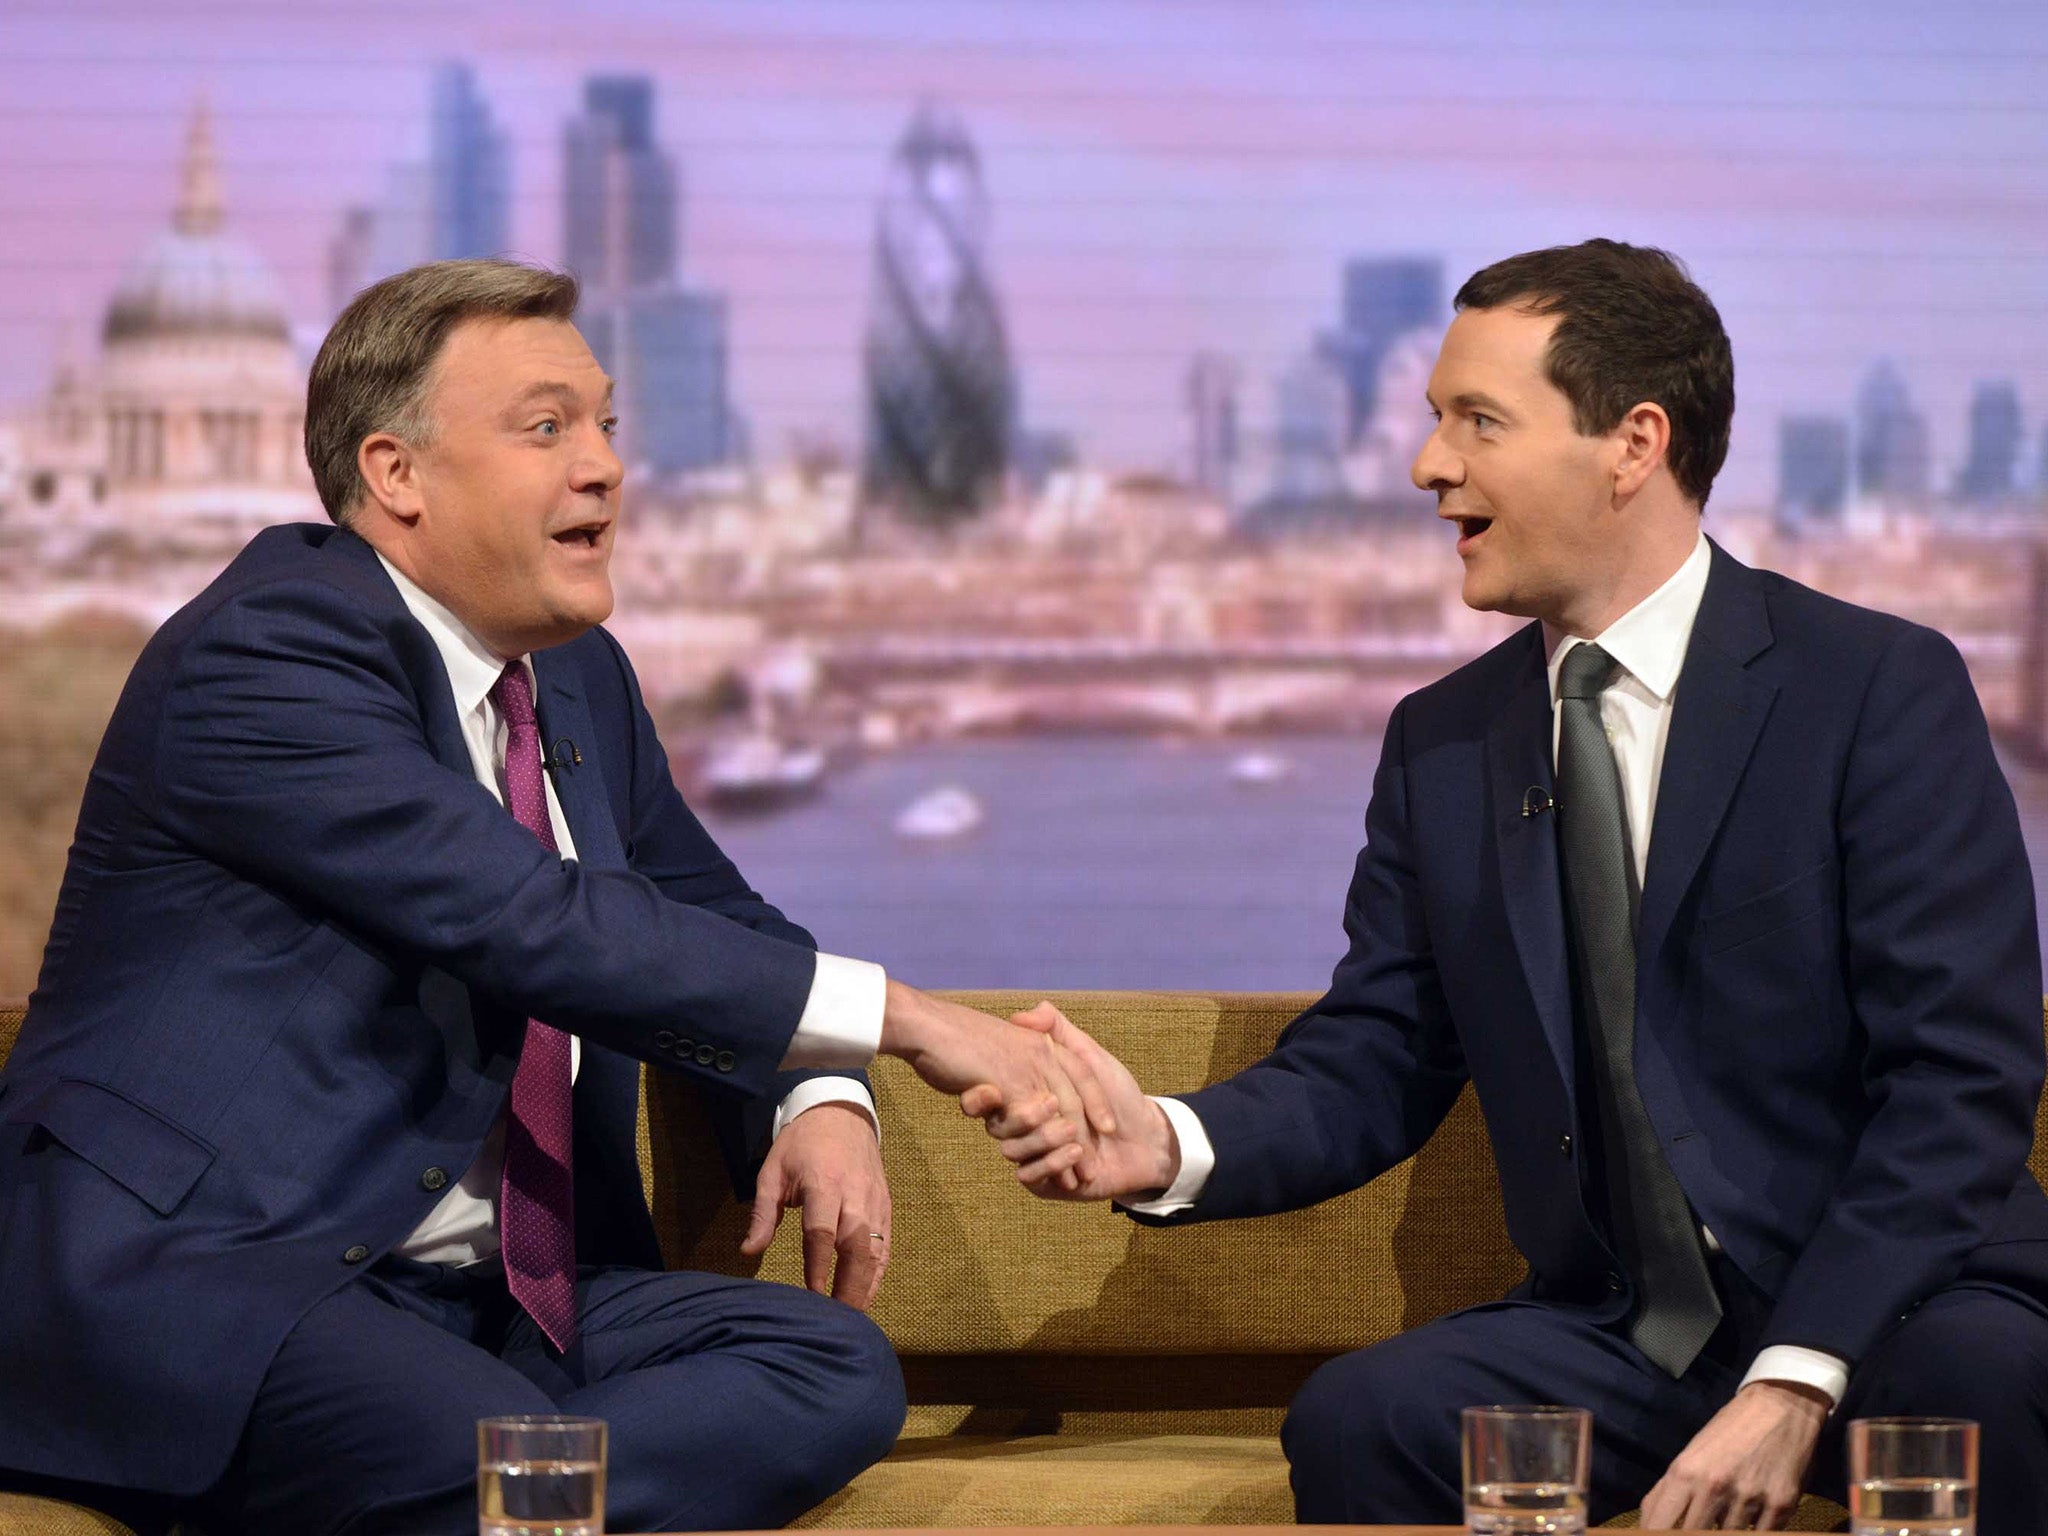 Shadow Chancellor Ed Balls (left) and Chancellor George Osborne appearing on BBC One's The Andrew Marr Show